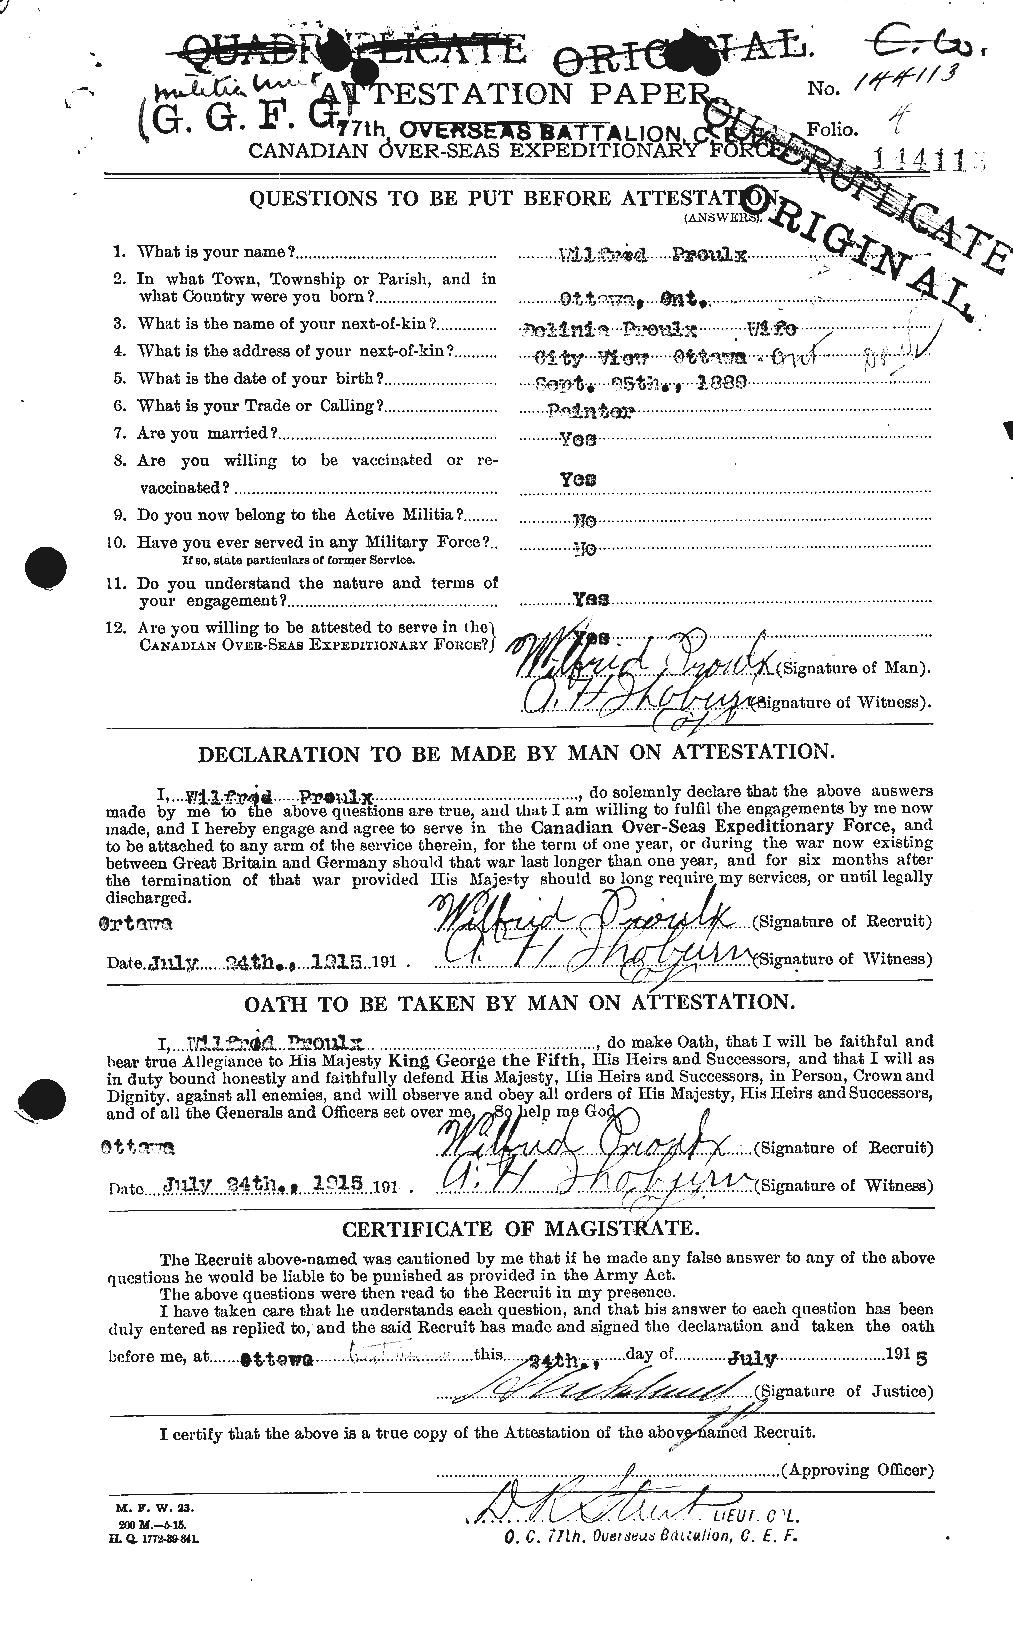 Personnel Records of the First World War - CEF 587644a